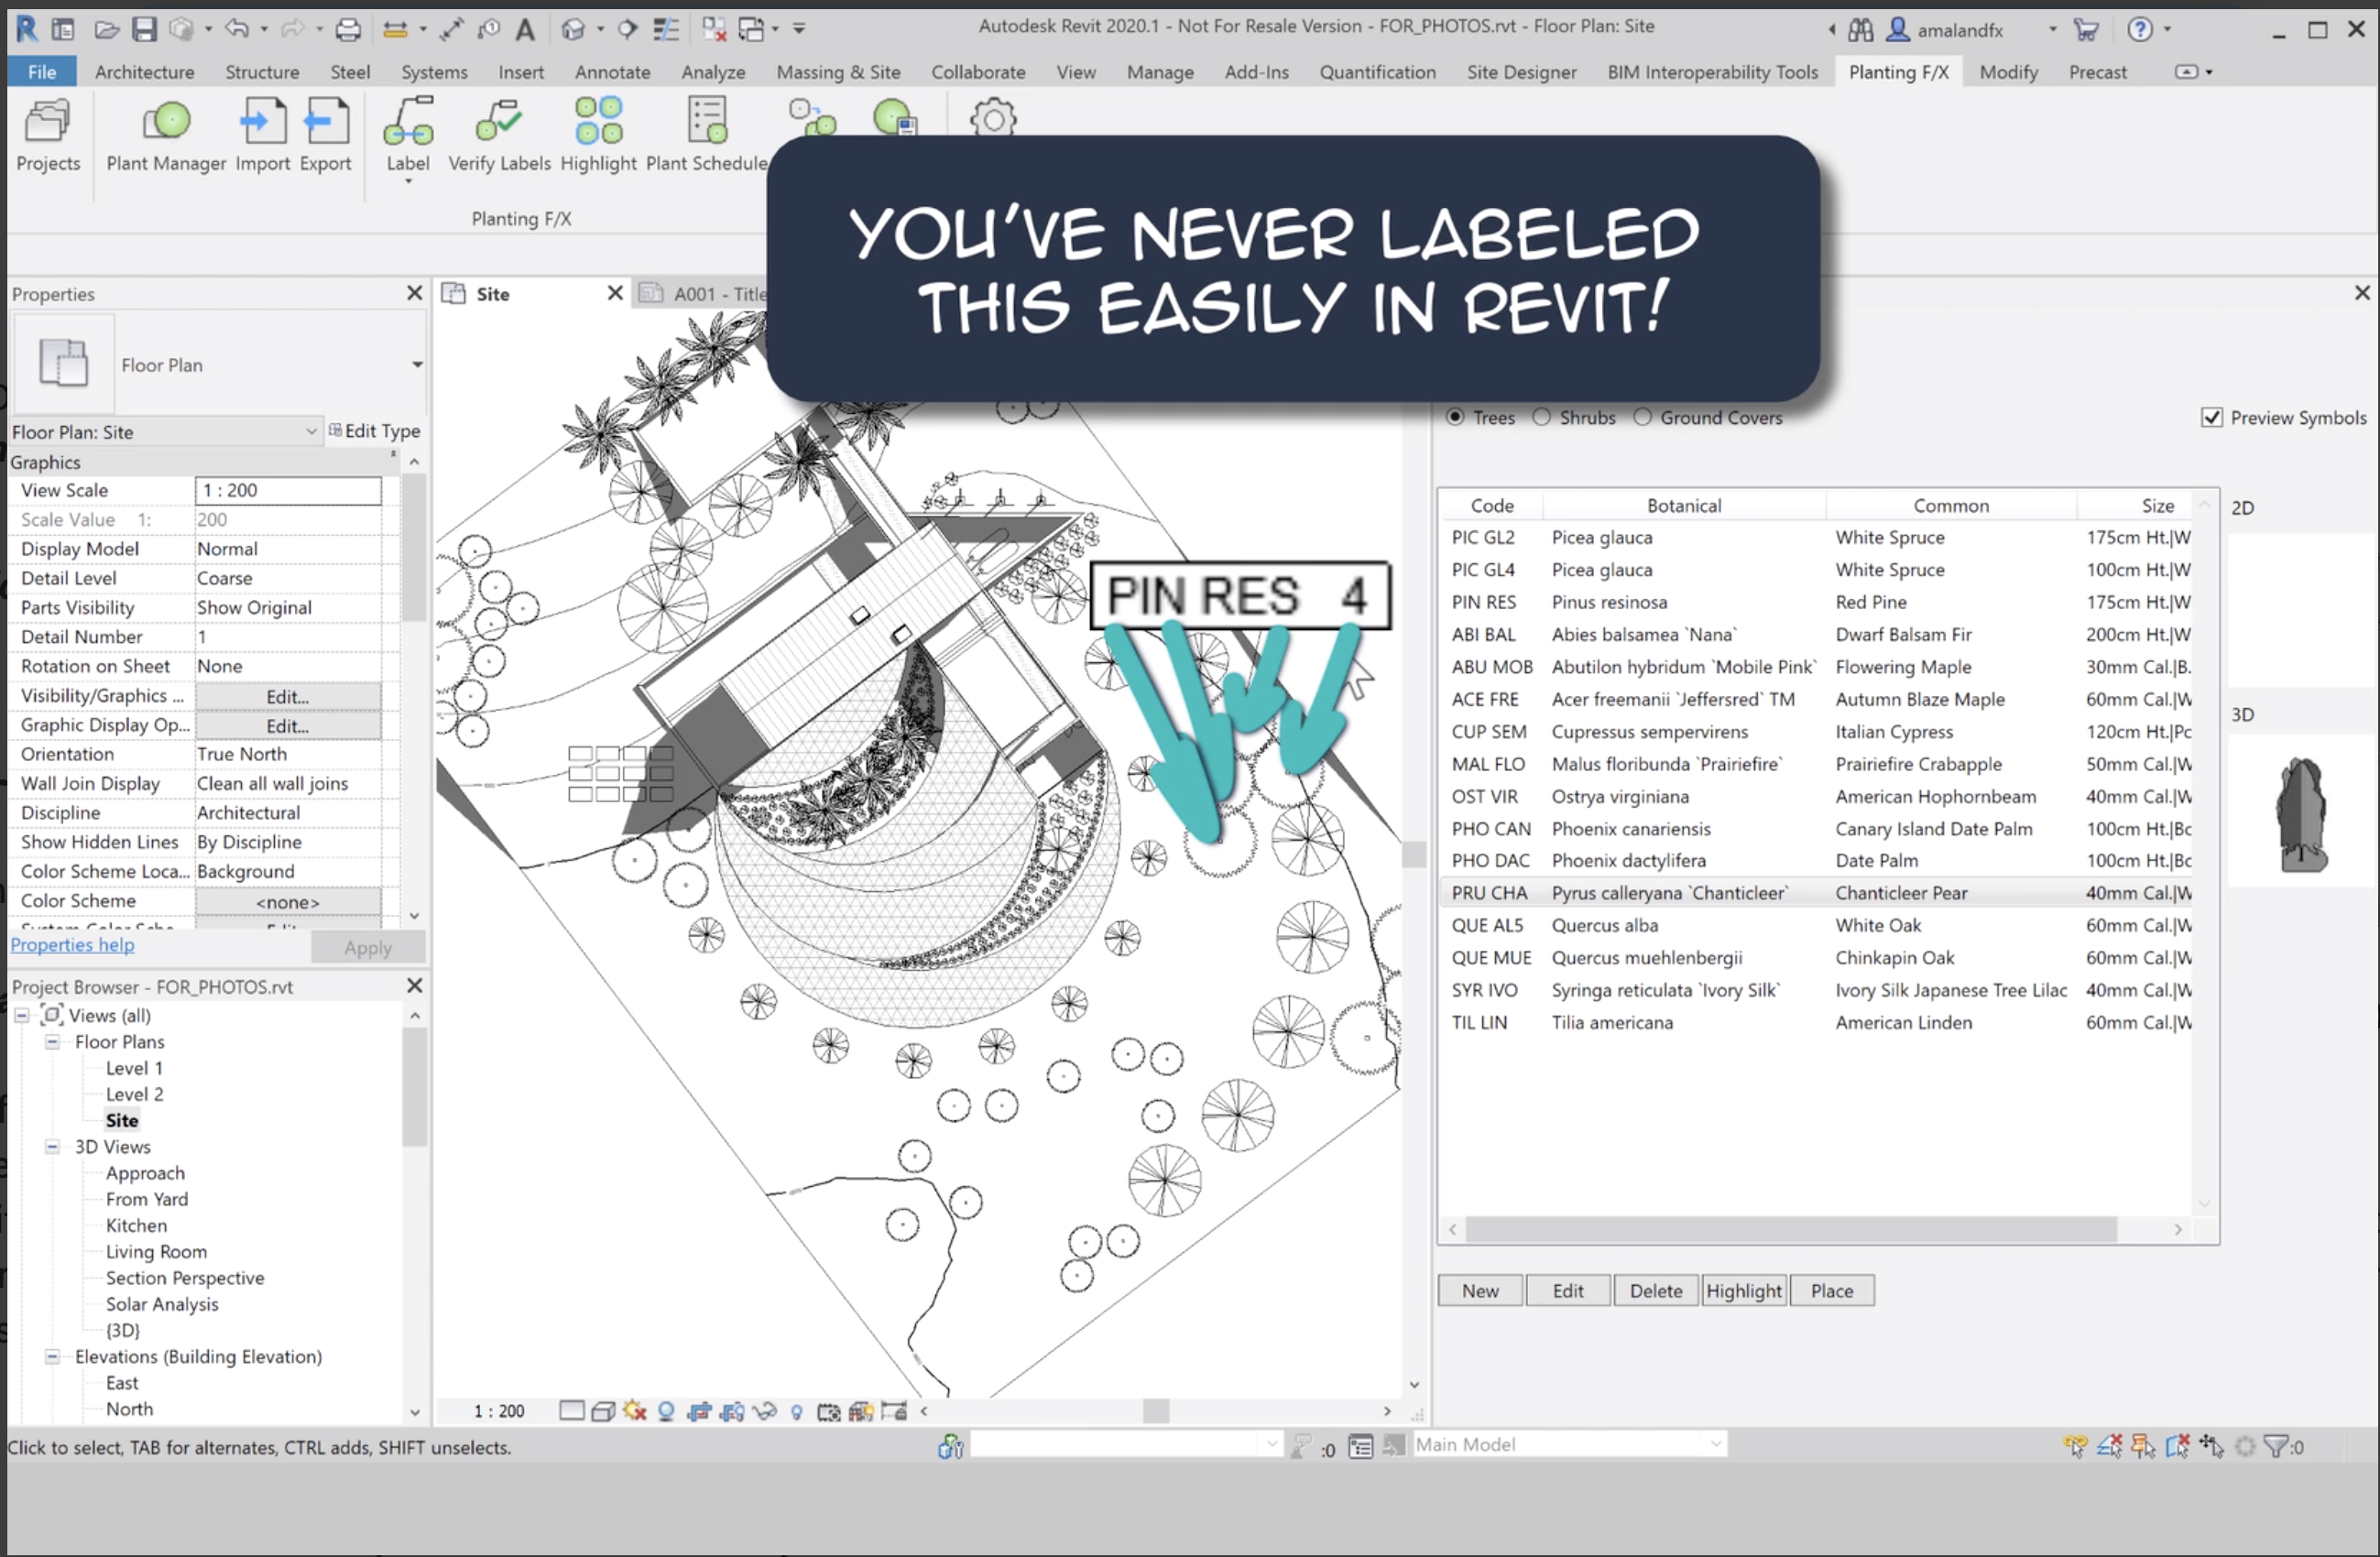 Labeling capability in the Planting F/X plugin for Revit